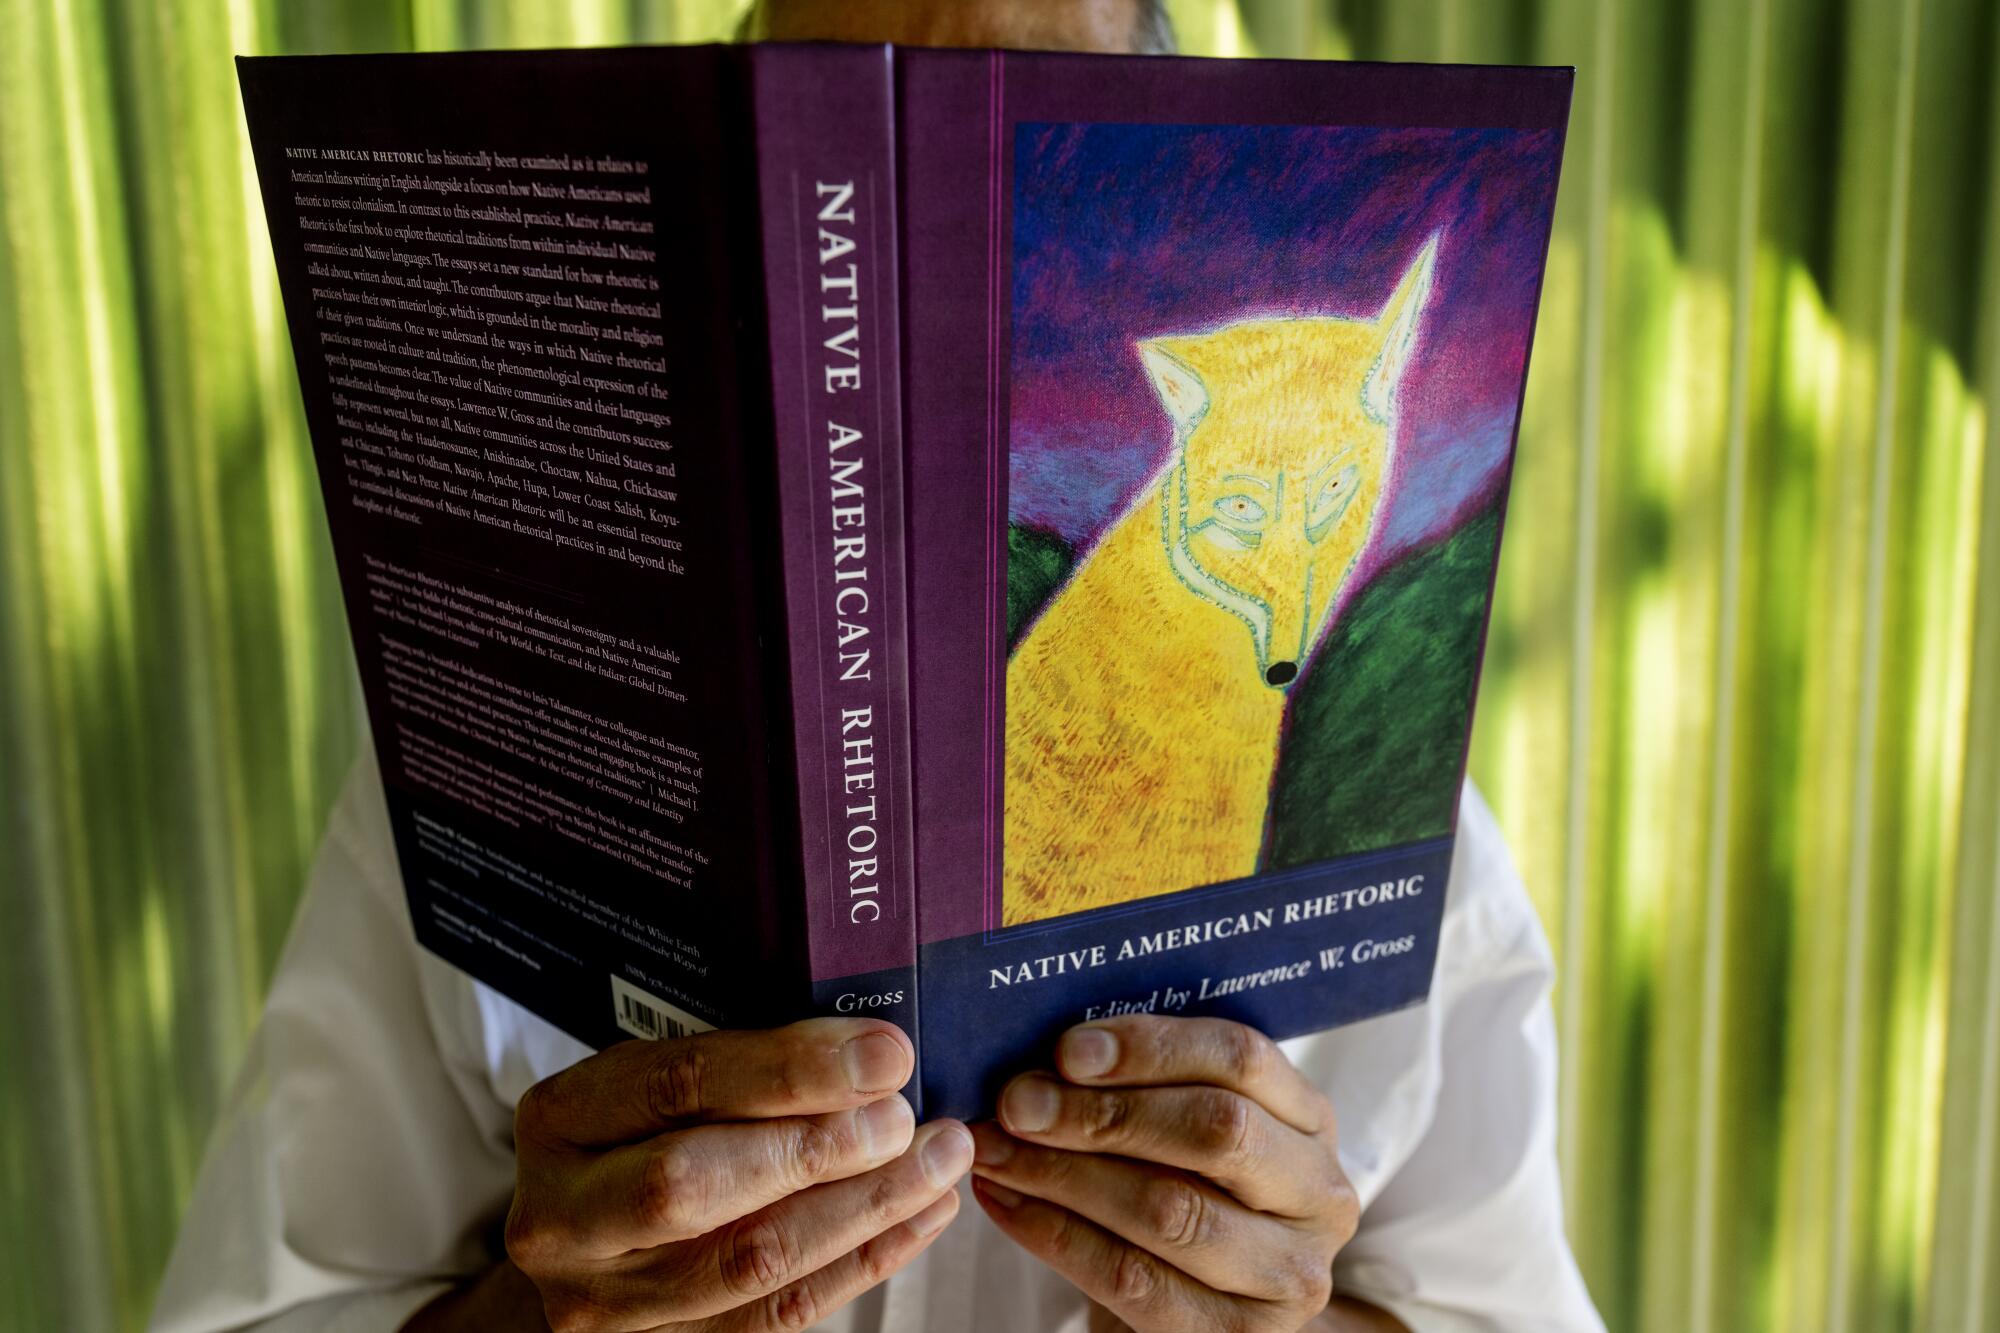 A man holds an open book with a drawing of a yellow-colored fox on its cover, his face behind the book